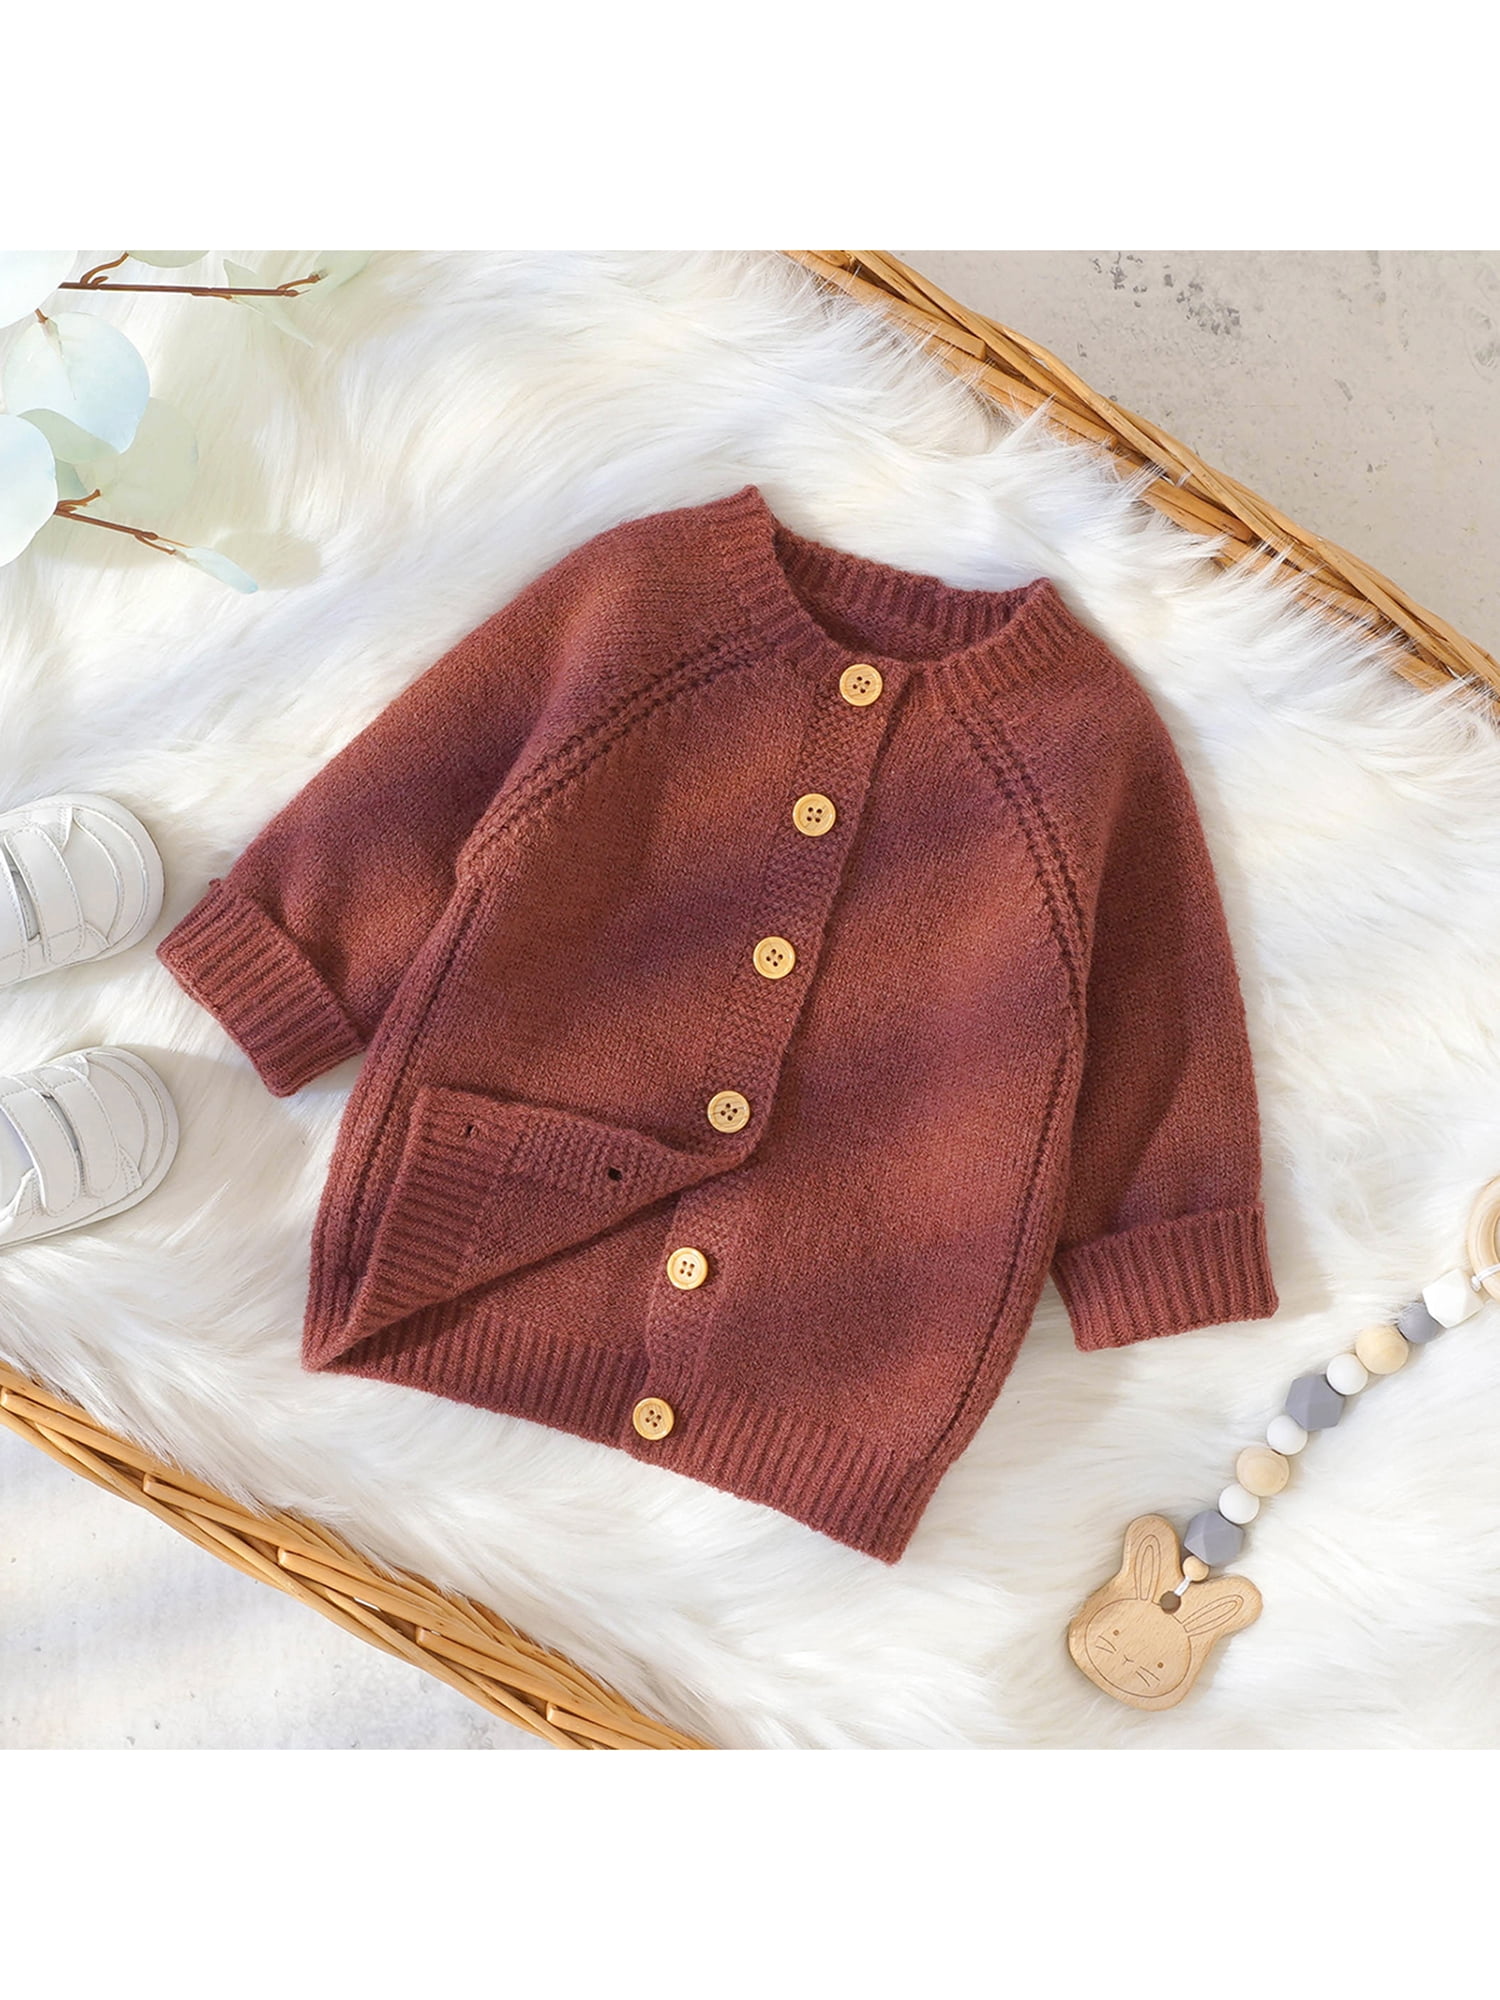 Canrulo Newborn Baby Girl Boy Knit Cardigan Sweater Checkerboard Long  Sleeve Button Sweater Coat Warm Fall Winter Clothes Camel 6-9 Months 